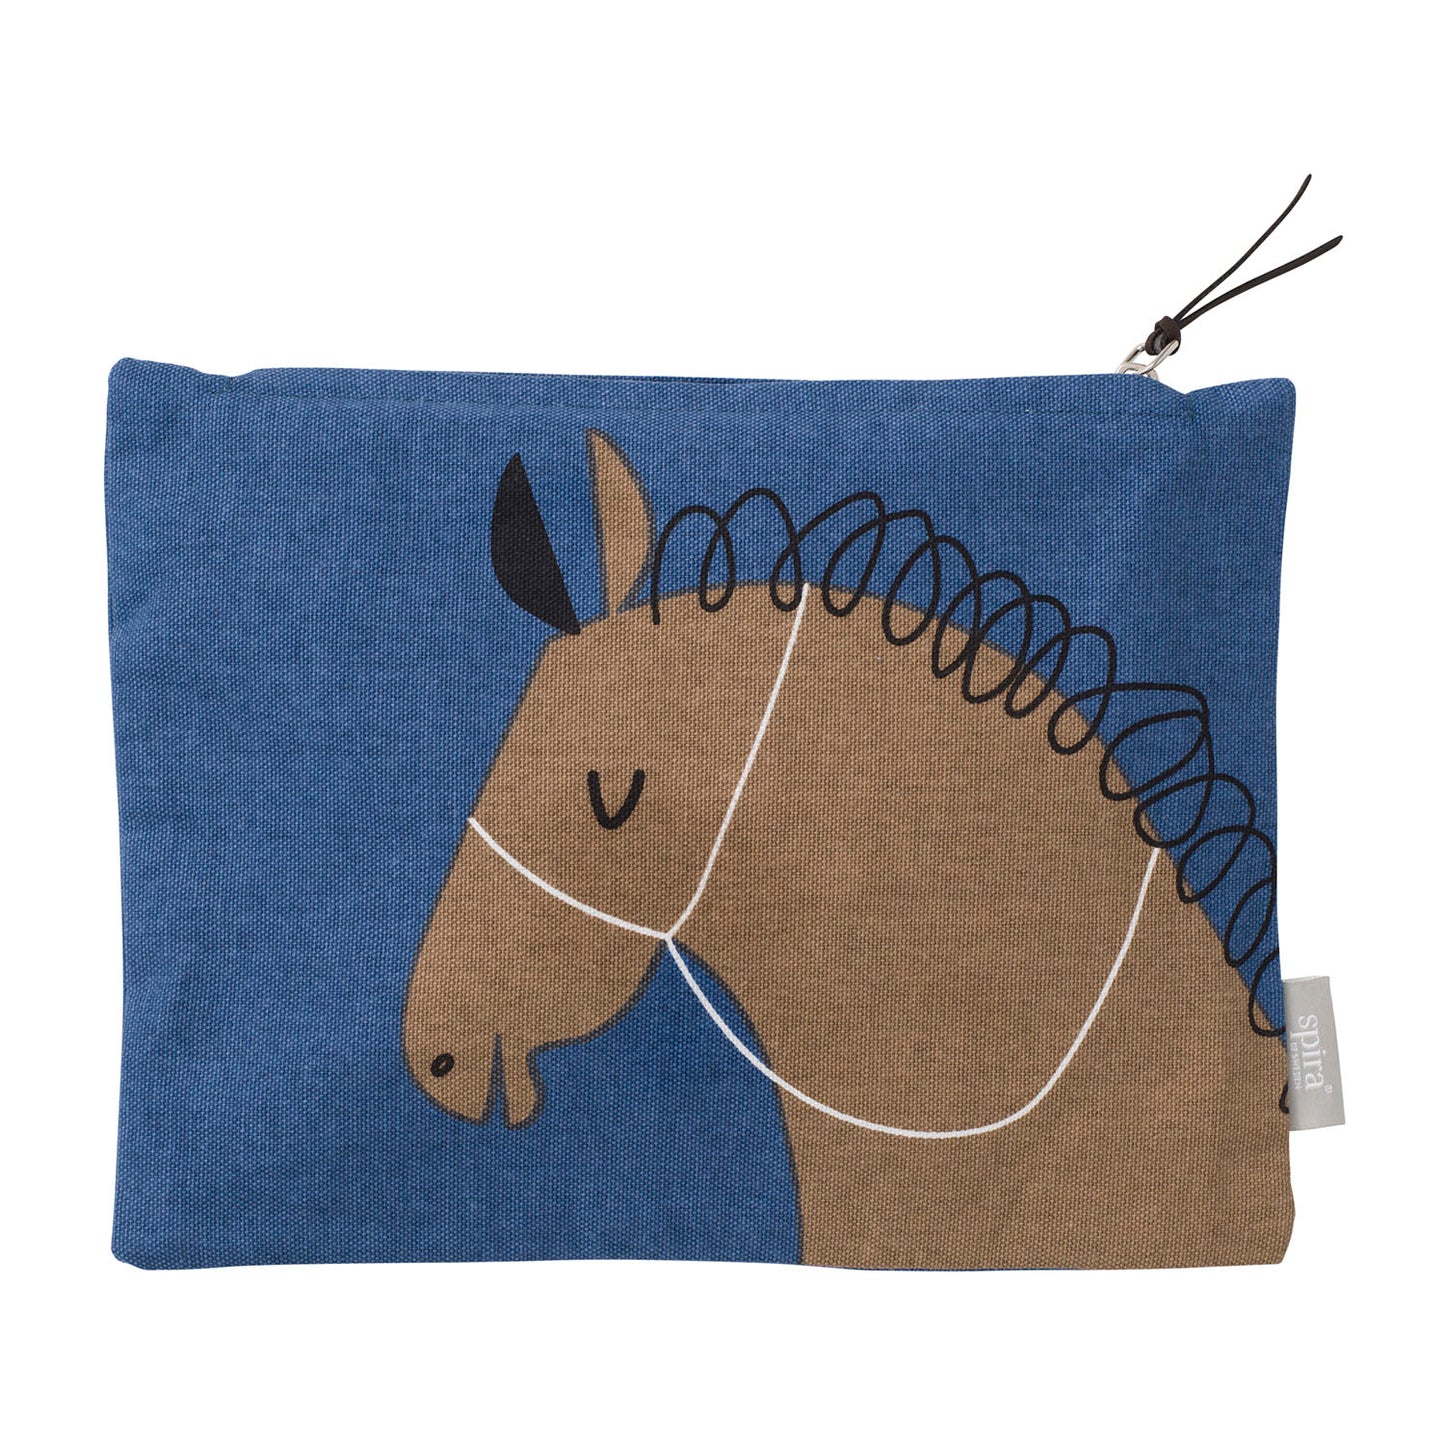 Deep blue zipped bag with an illustration of a profile of a brown horse with a white bridle and black curly main.